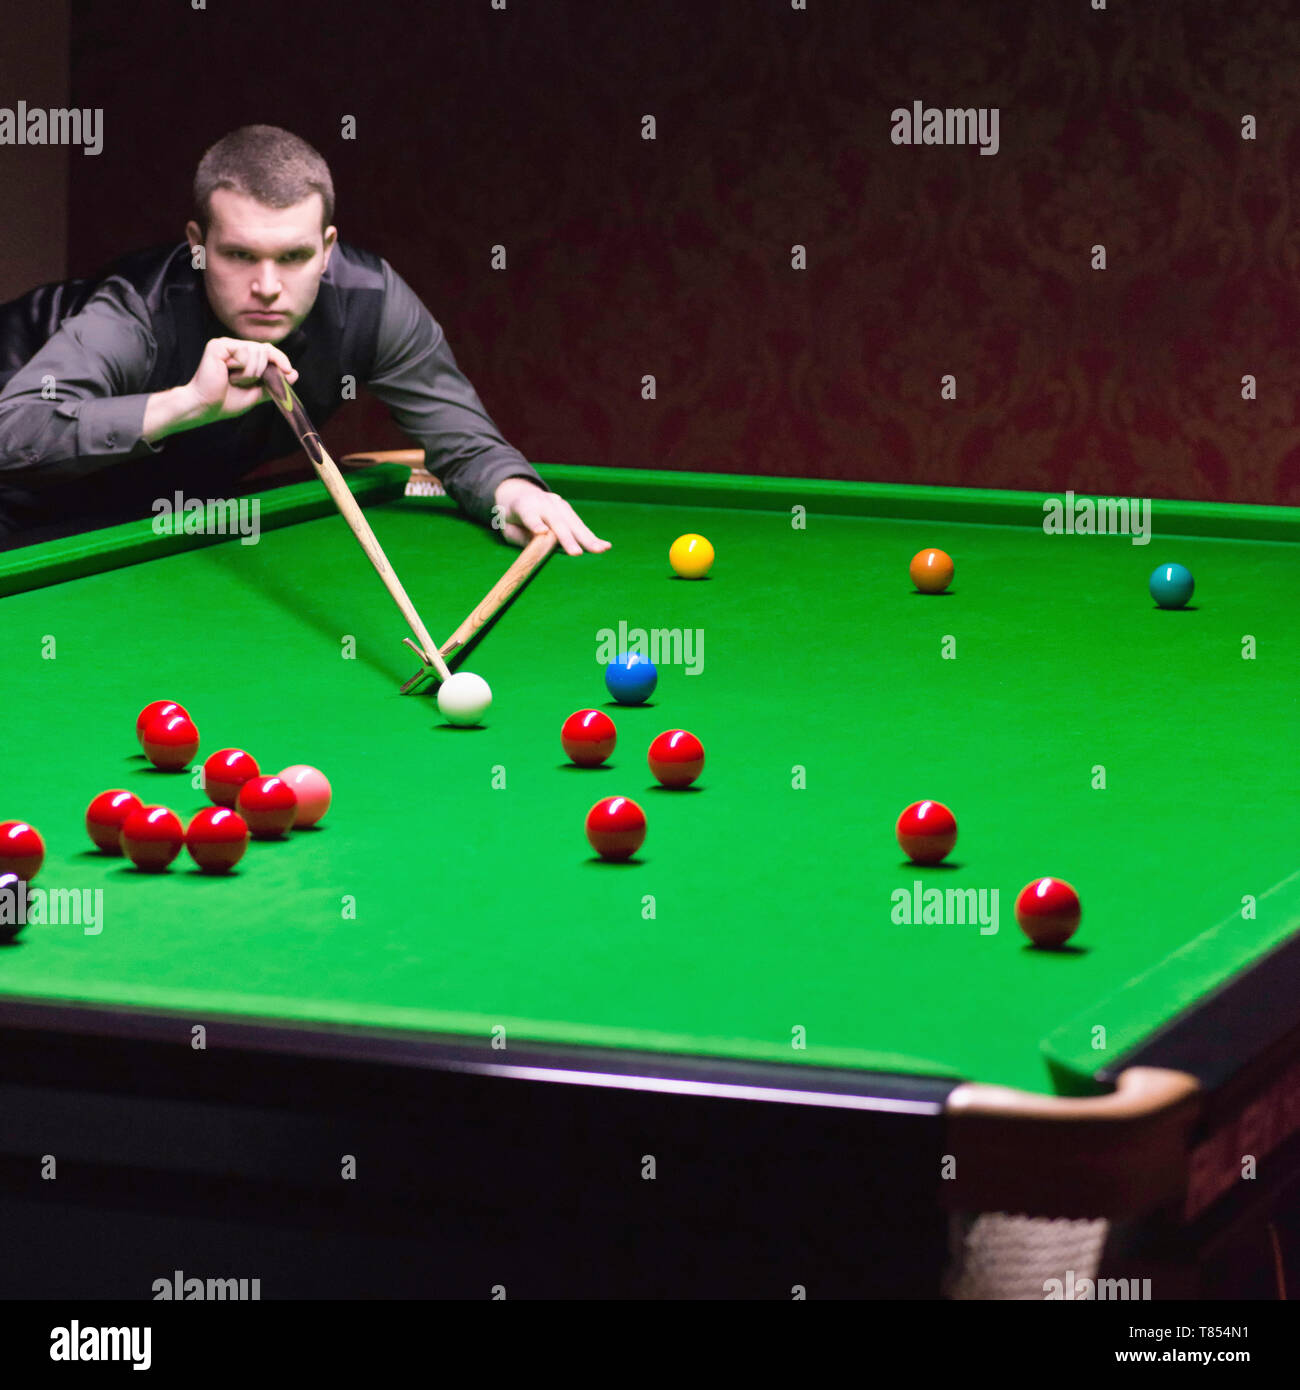 Snooker player Stock Photo